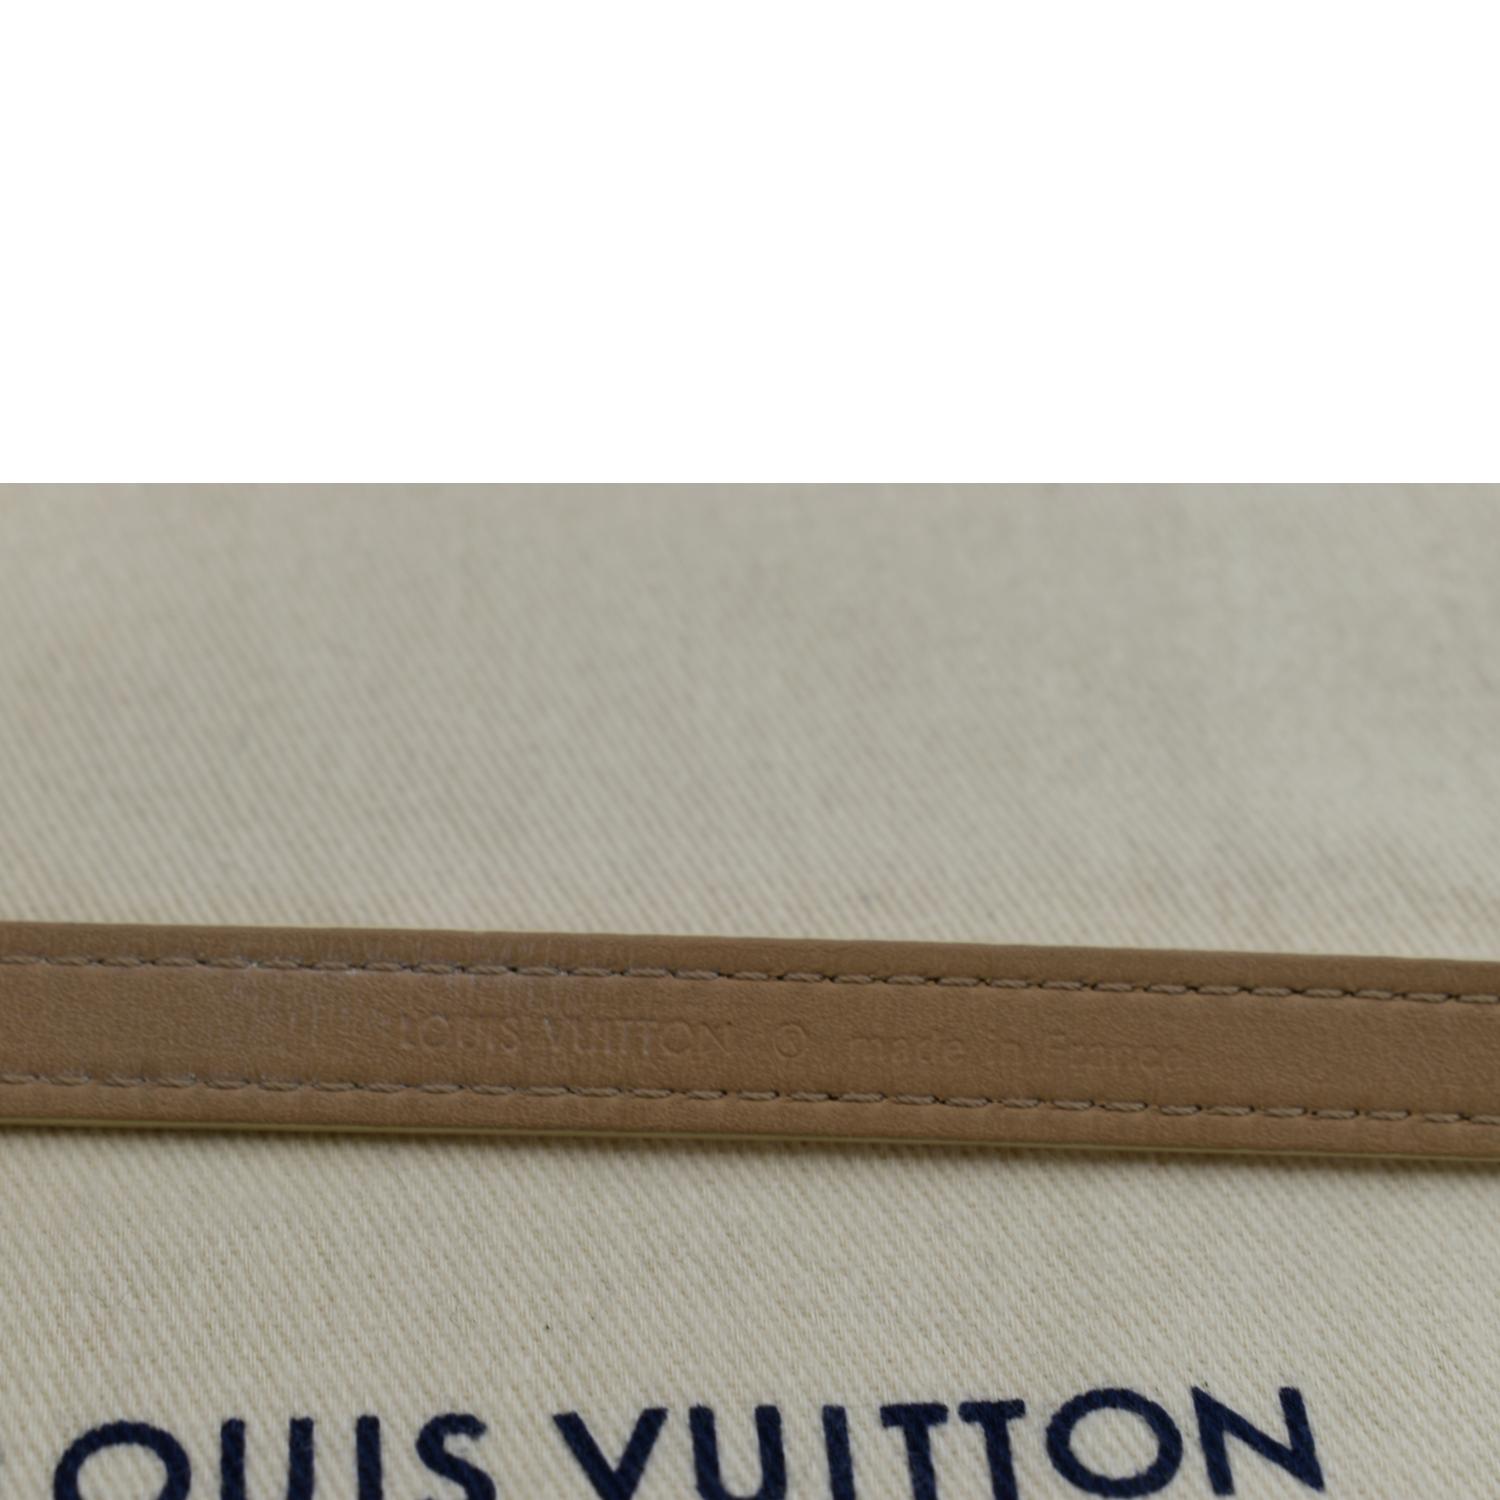 stitching on a real louis vuitton